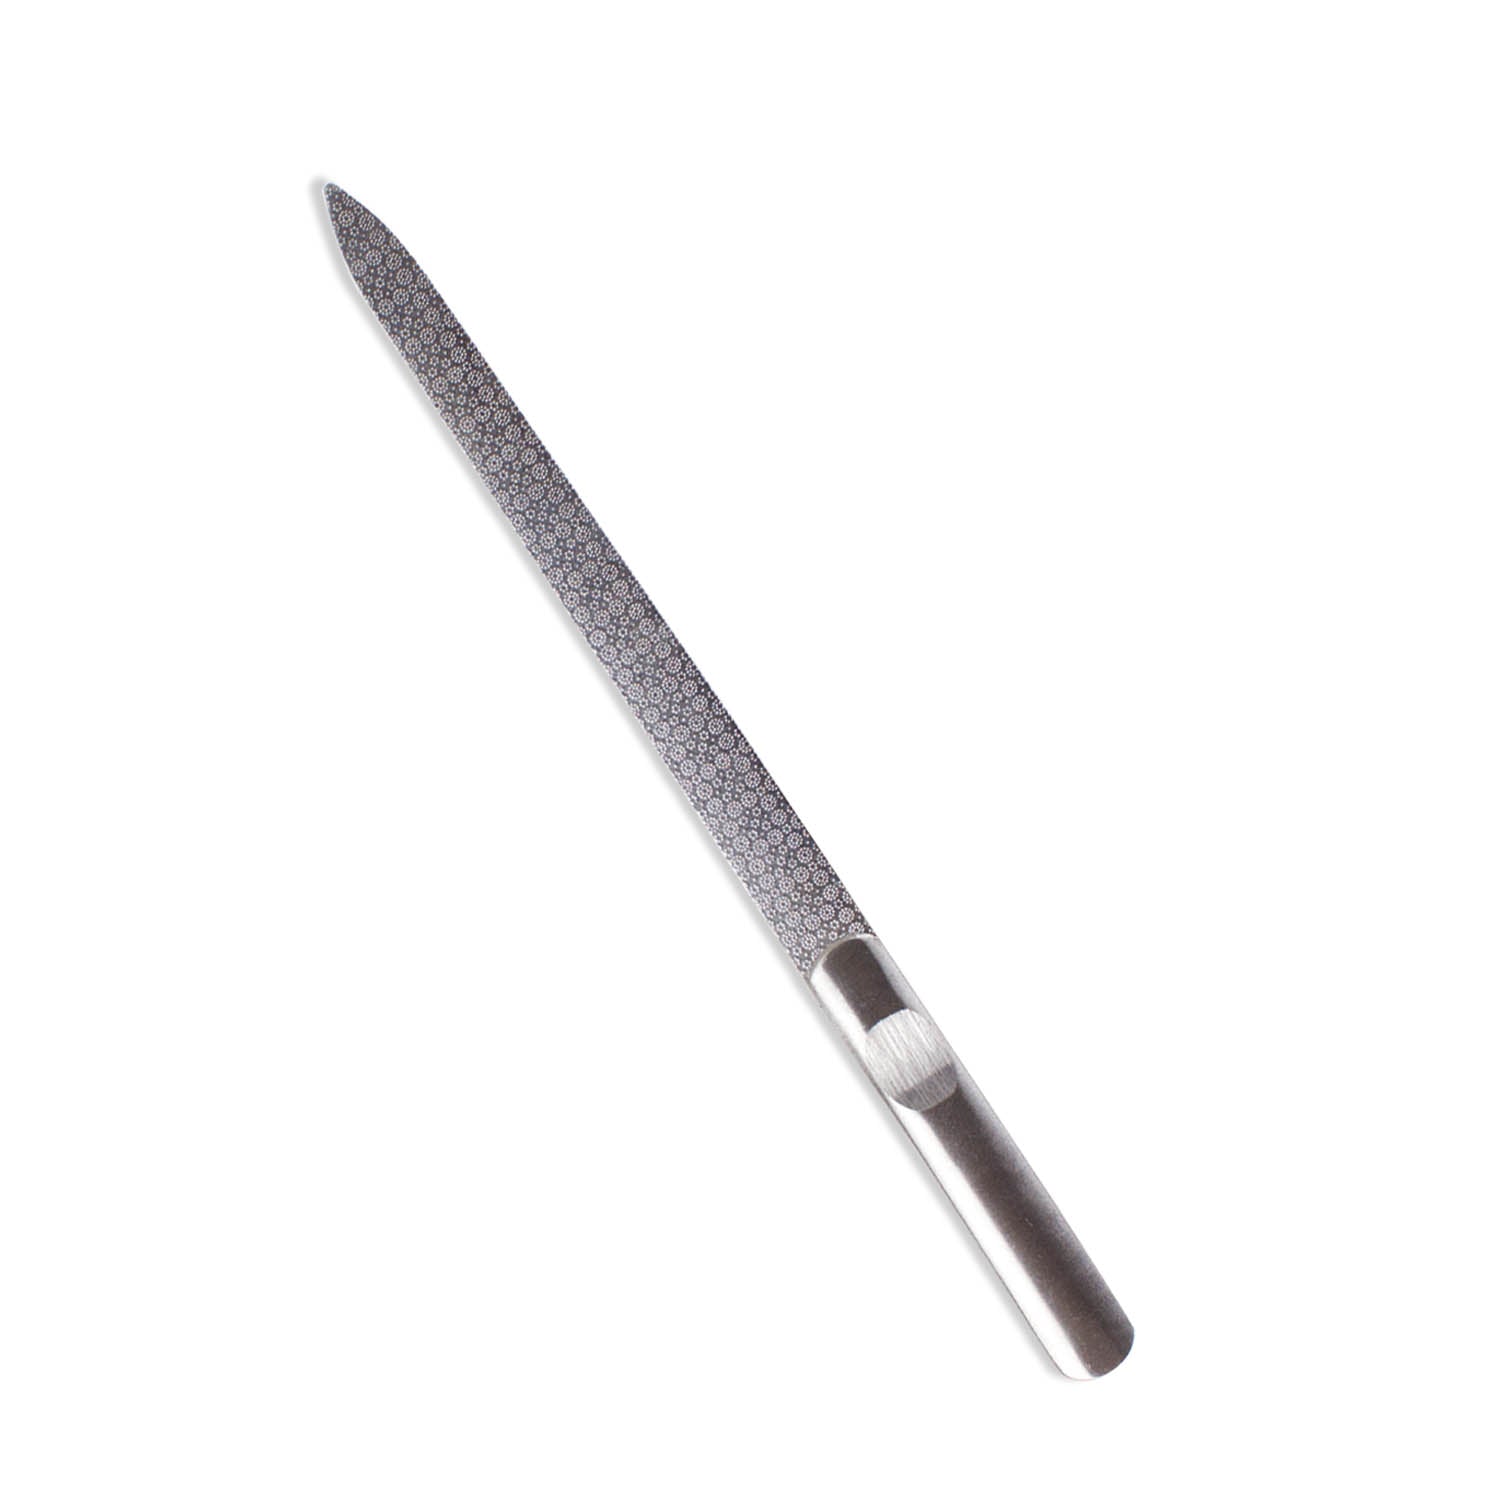 Stainless Steel Nail File - Made to last - With a black leather case! –  Suwada1926